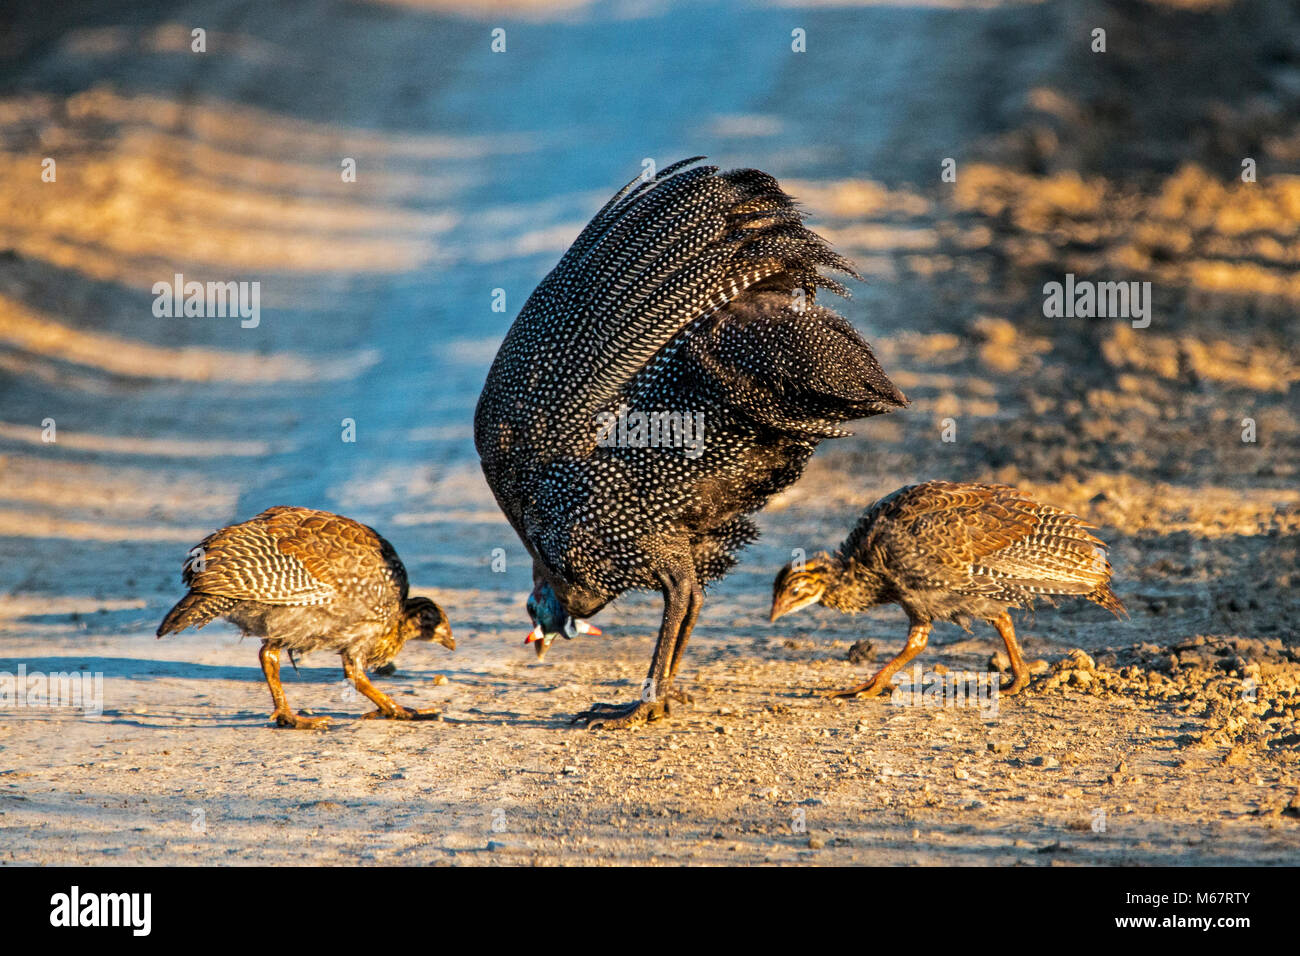 Female Guinea fowl and two chicks feeding on dirt road in rural South Africa Stock Photo